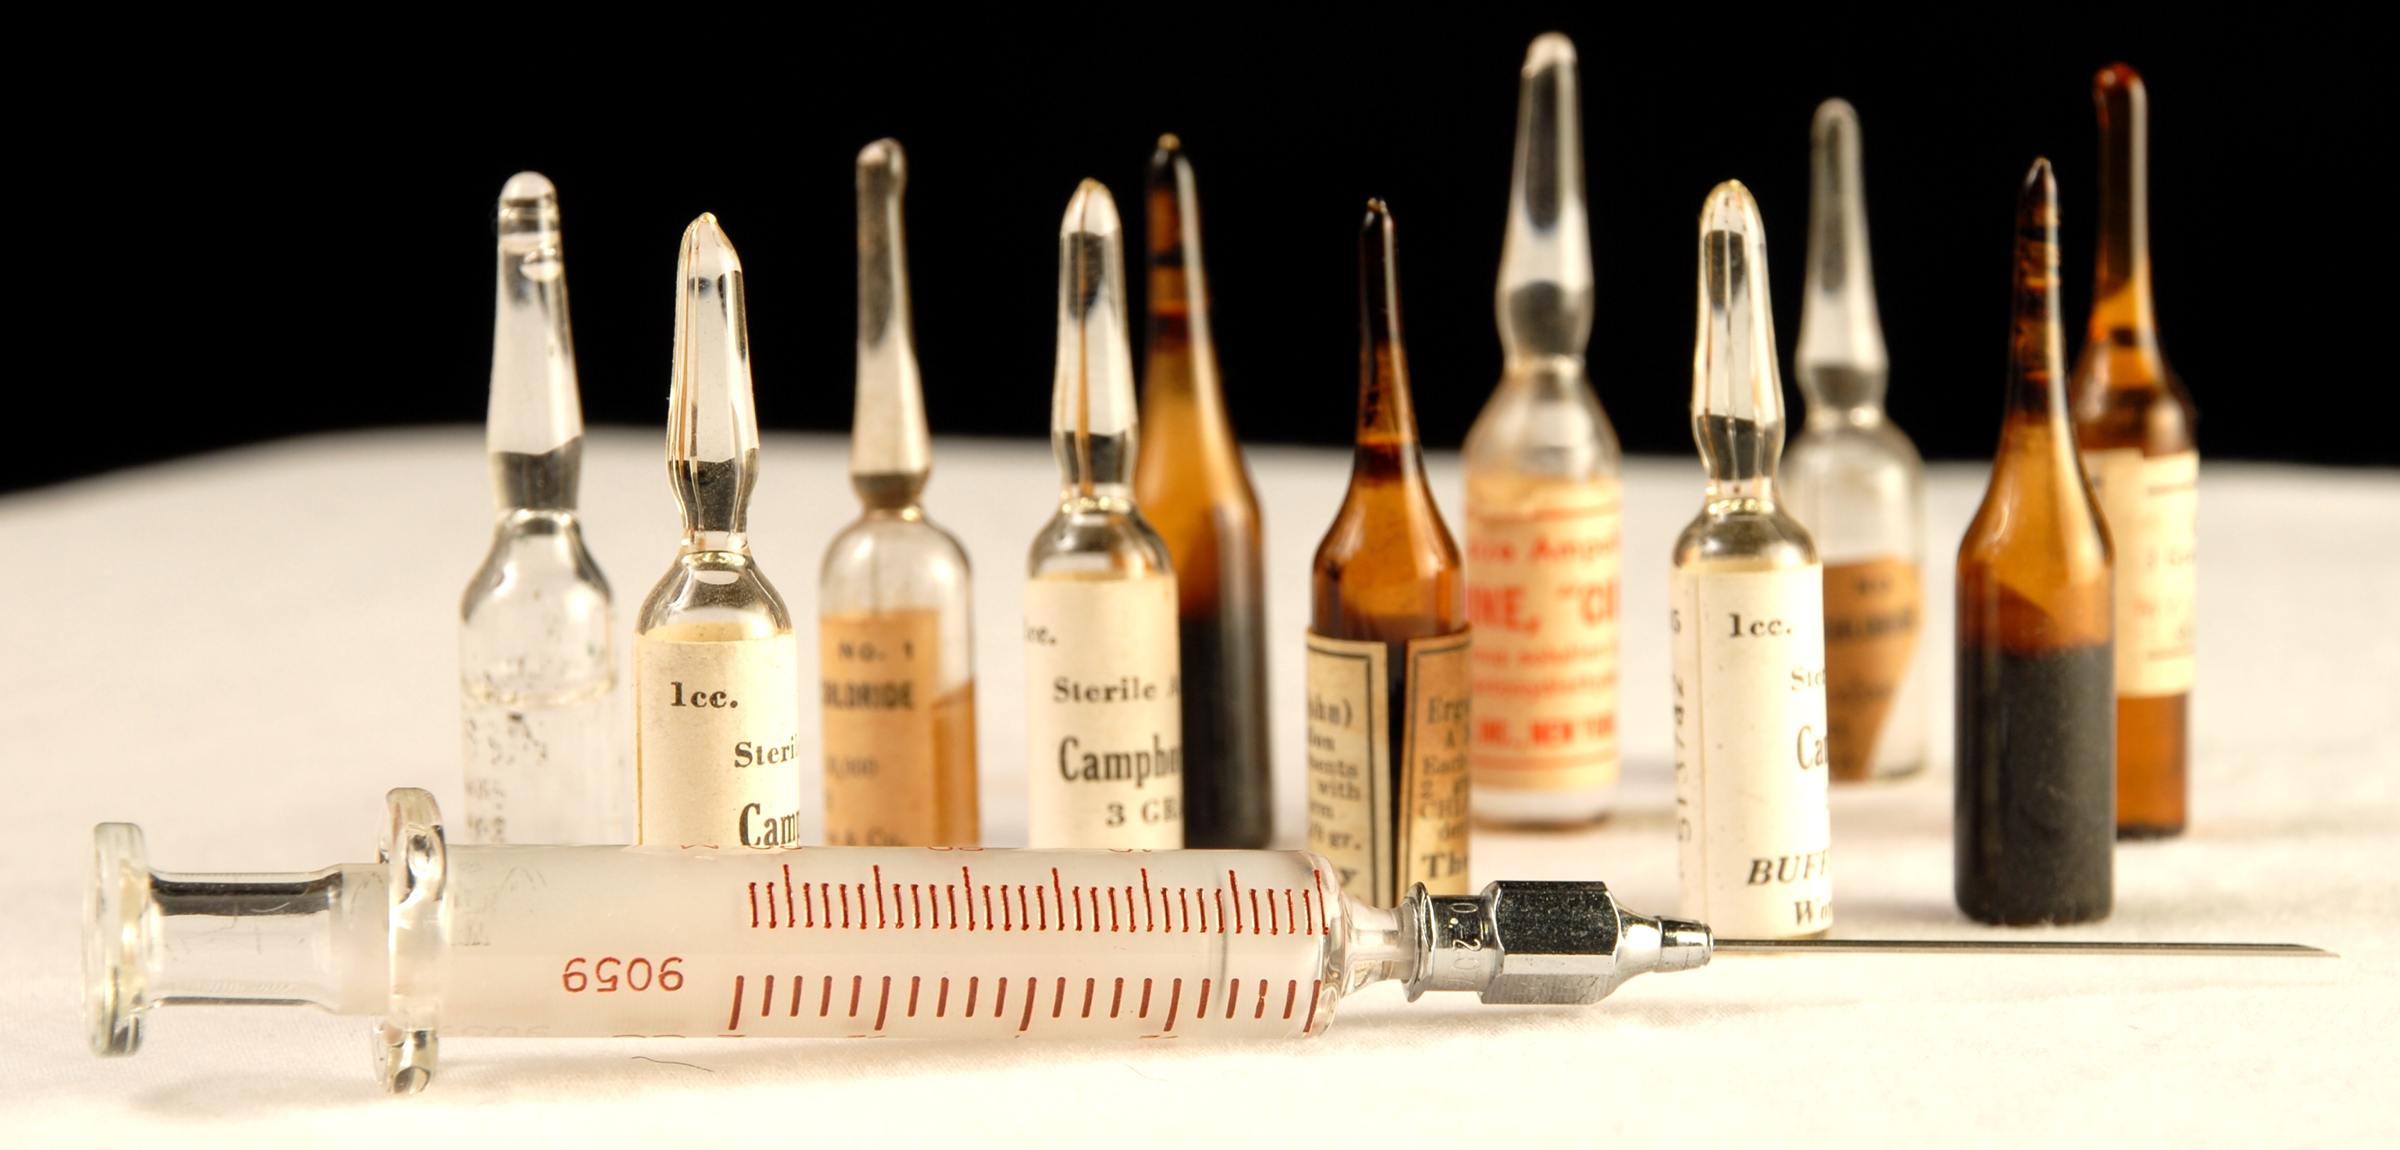 An empty syringe lies sideways in front of a variety of glass vials